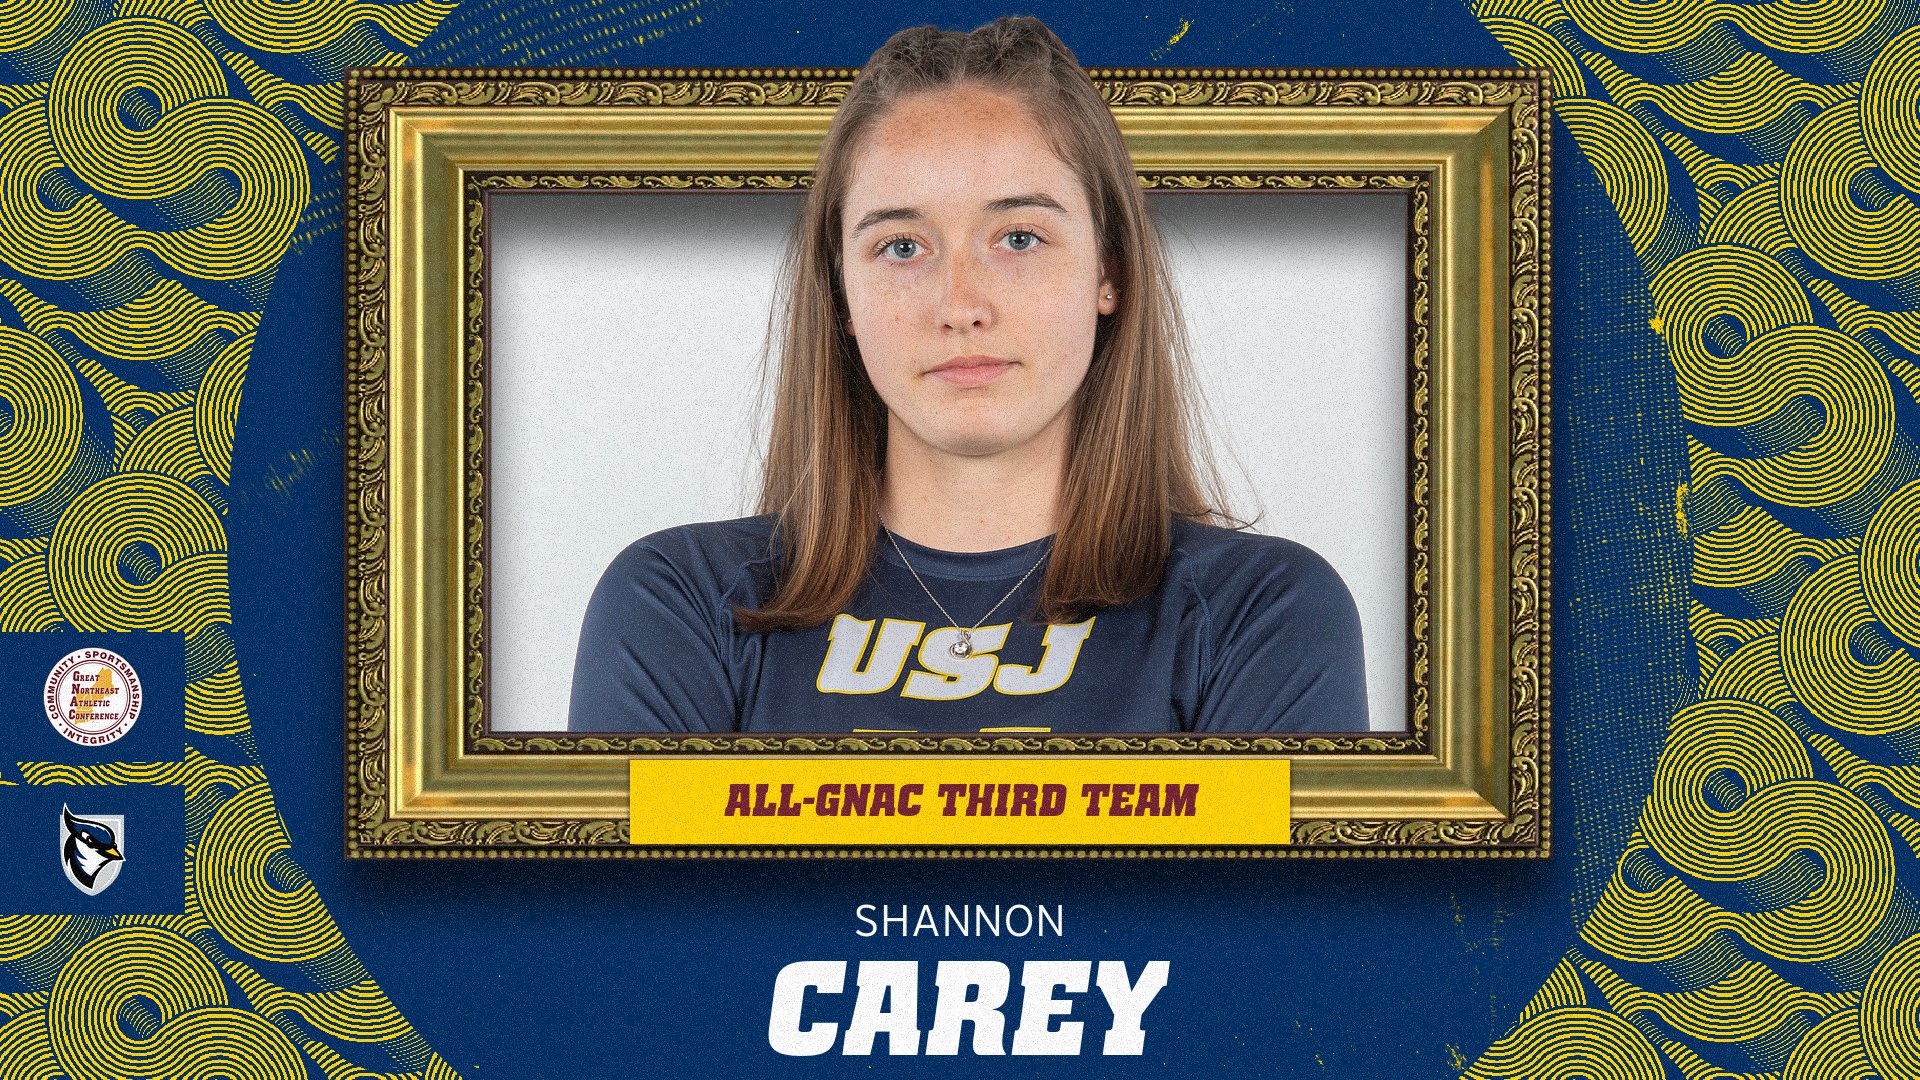 Carey Named to Women's Volleyball All-GNAC Third Team